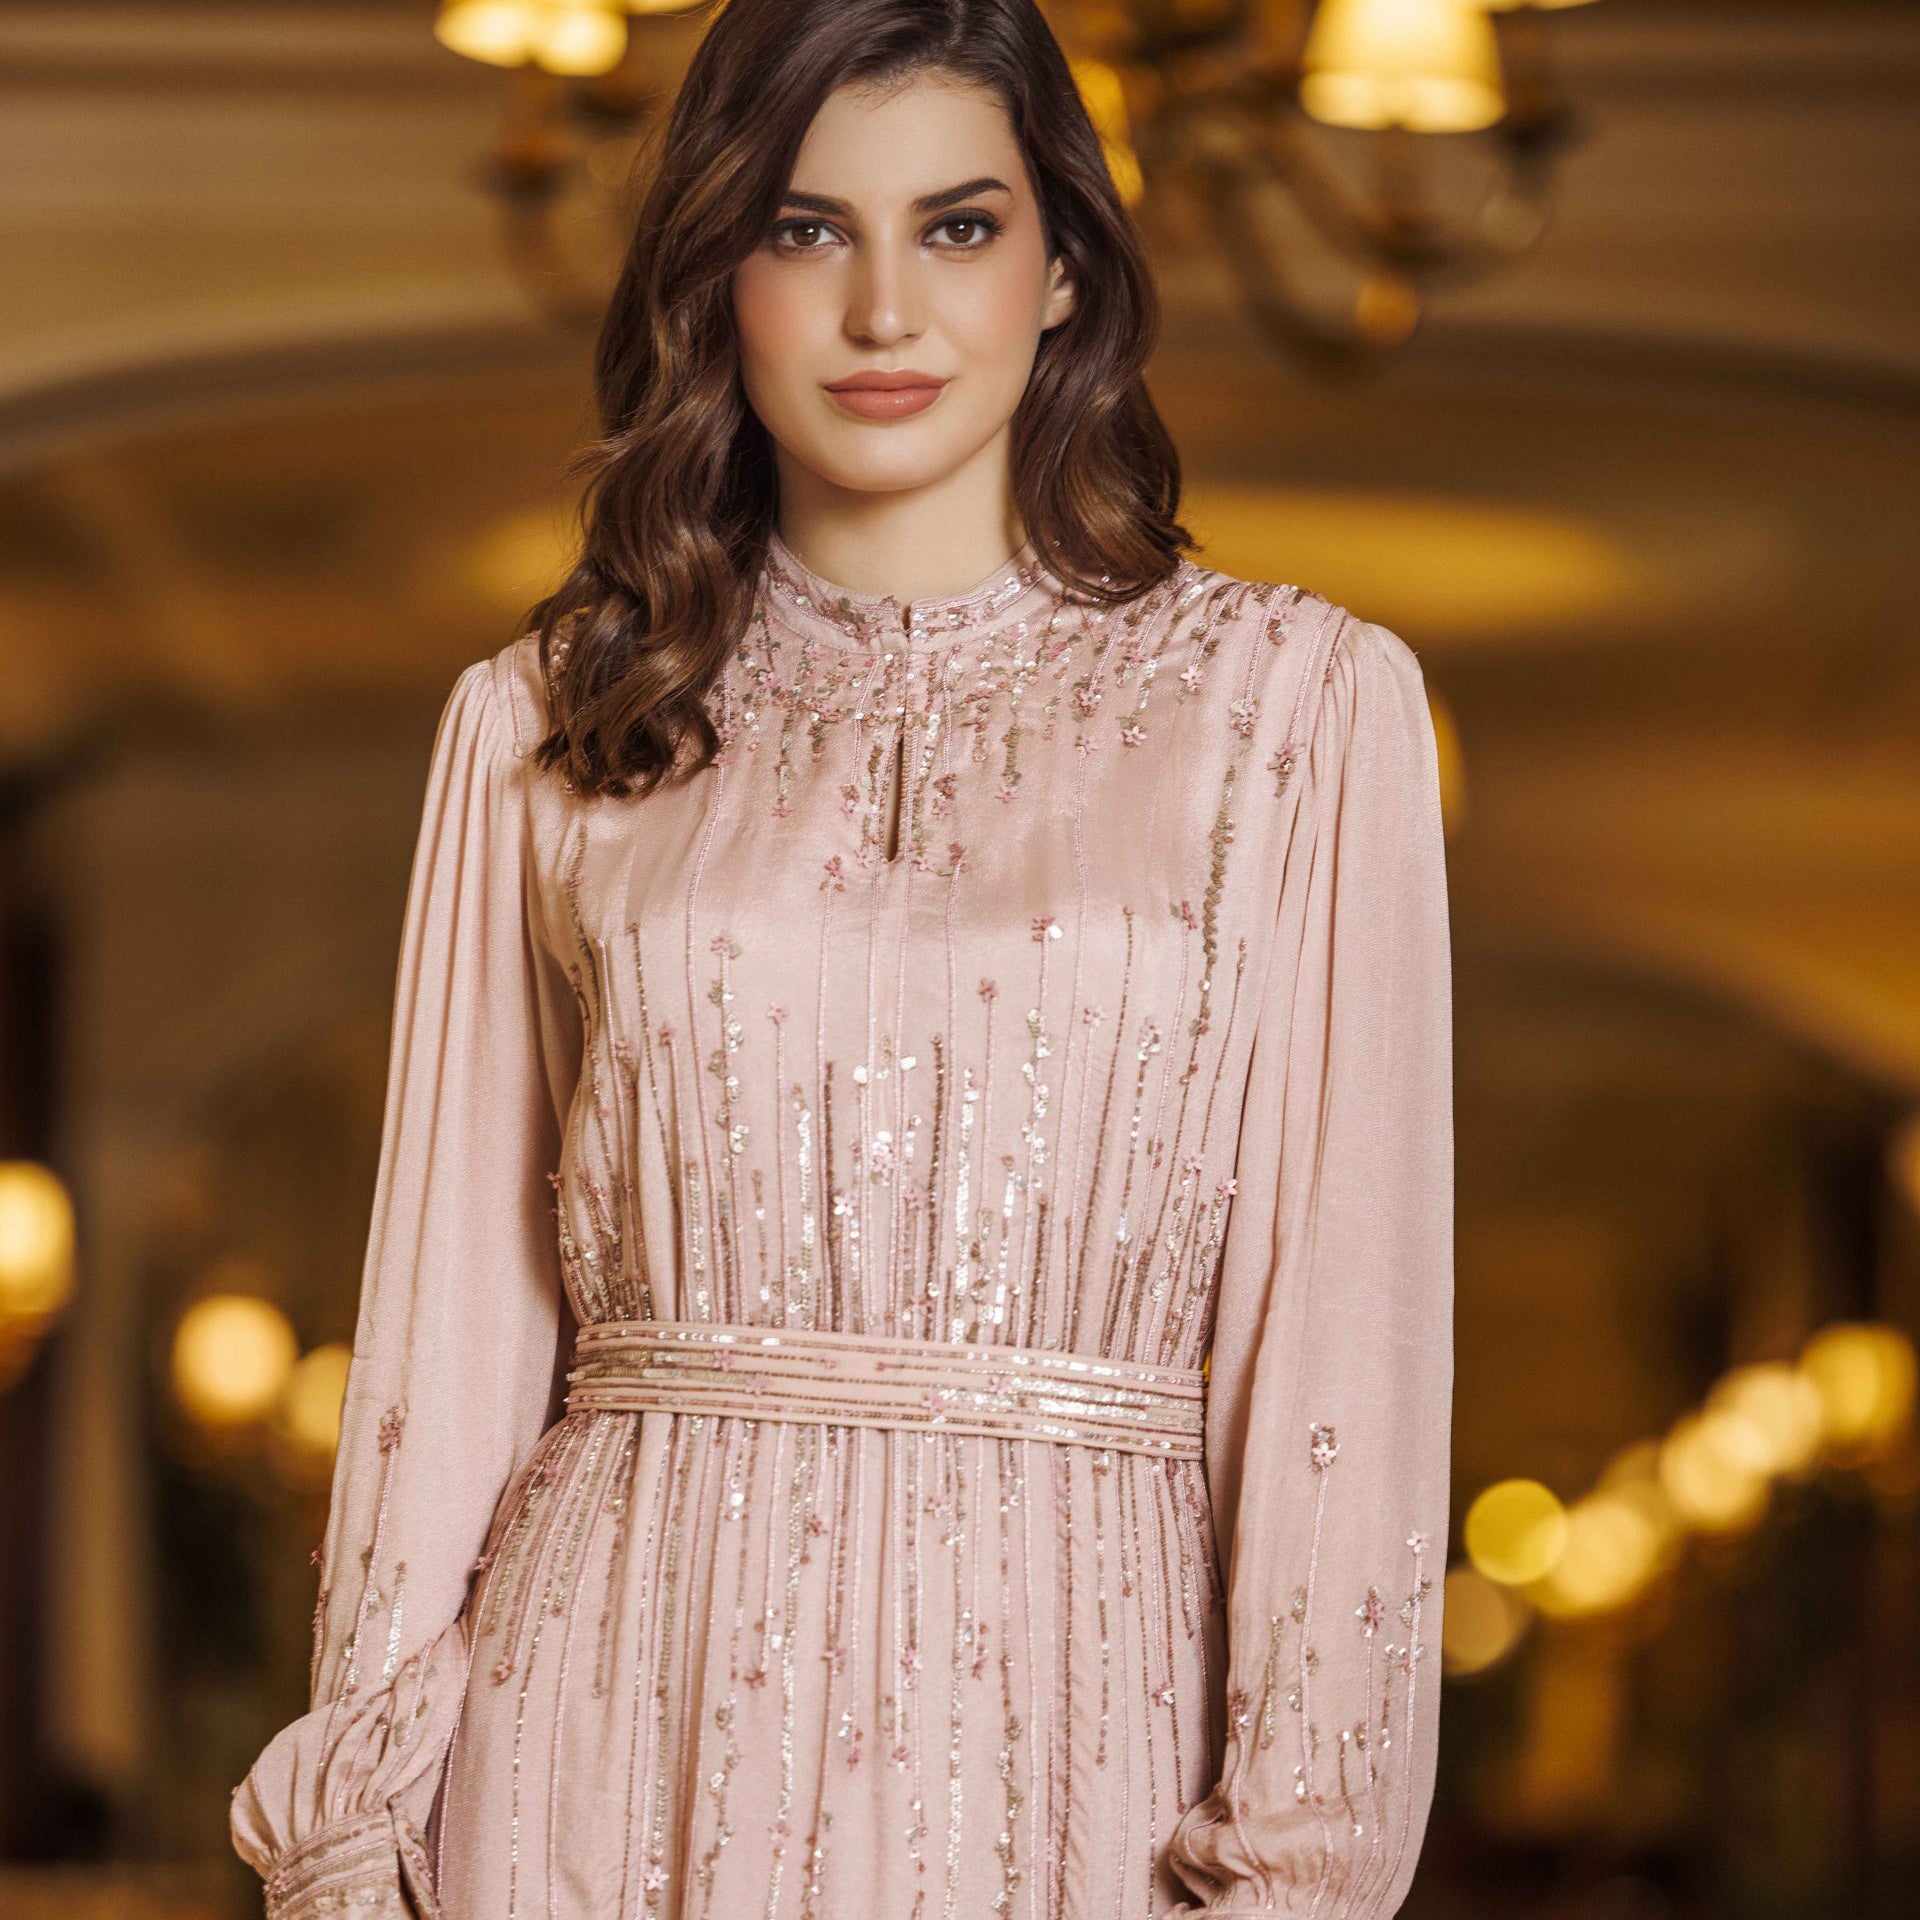 Pink Kalinga Dress With Long Sleeves And Silver Embroidery From Shalky